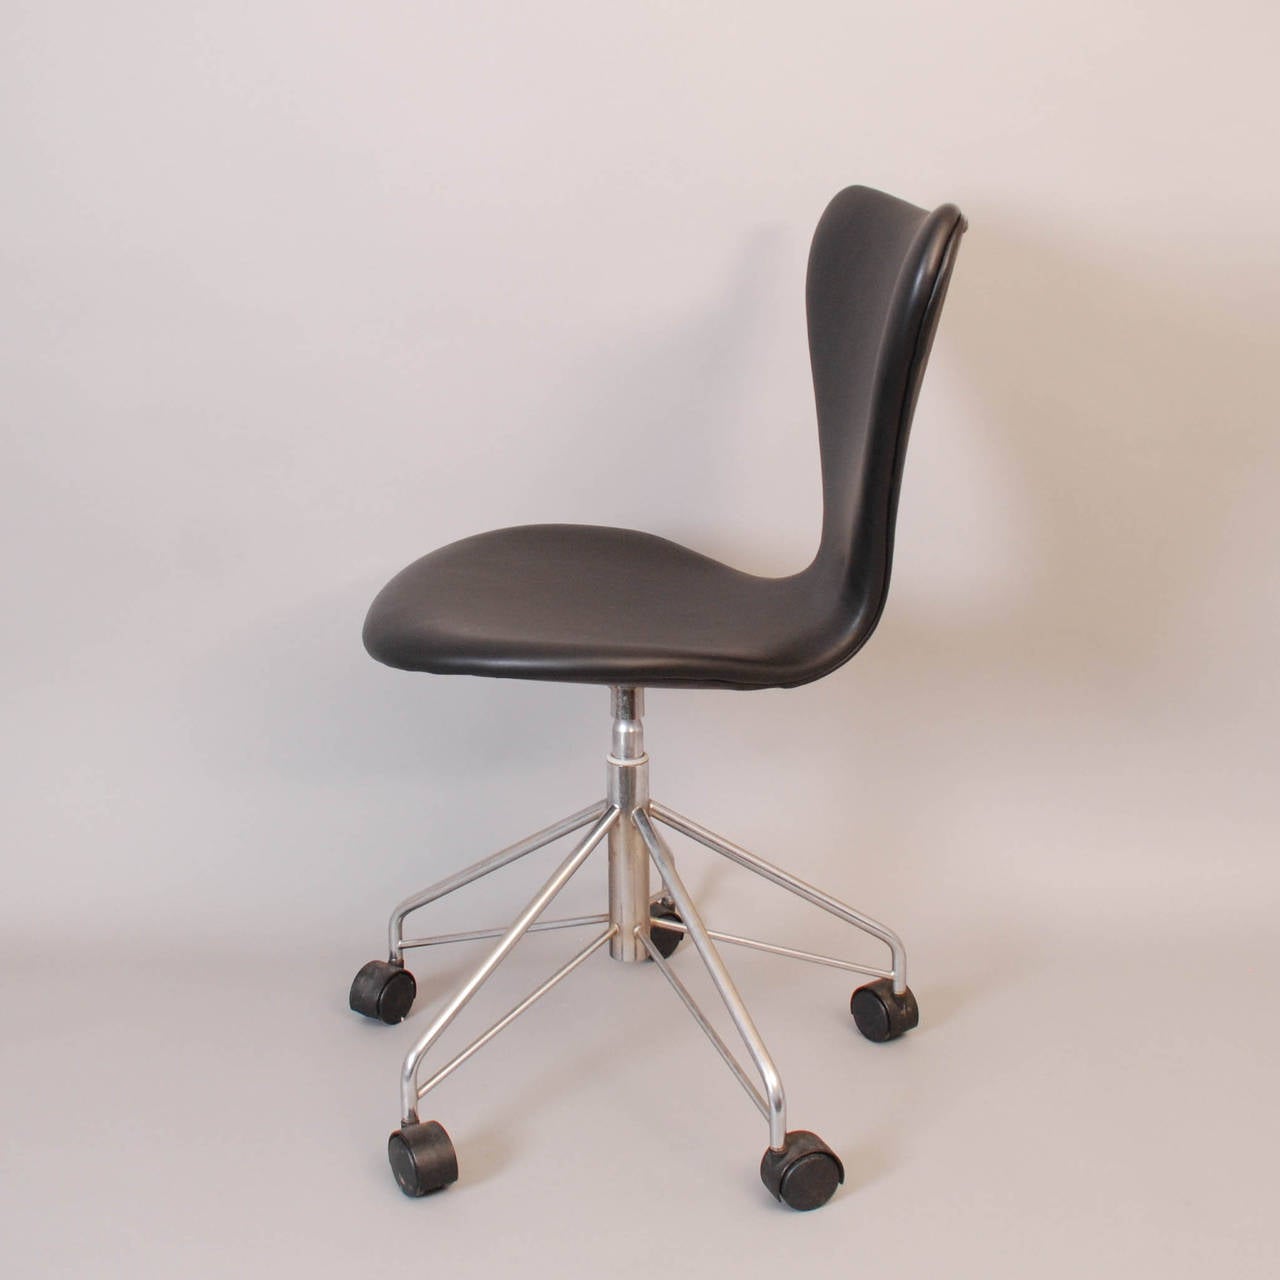 Office swivel chair from the 7 series by Arne Jacobsen for Fritz Hansen, Denmark. Designed in 1955.
Fully upholstered and recently reupholstered in black leather.